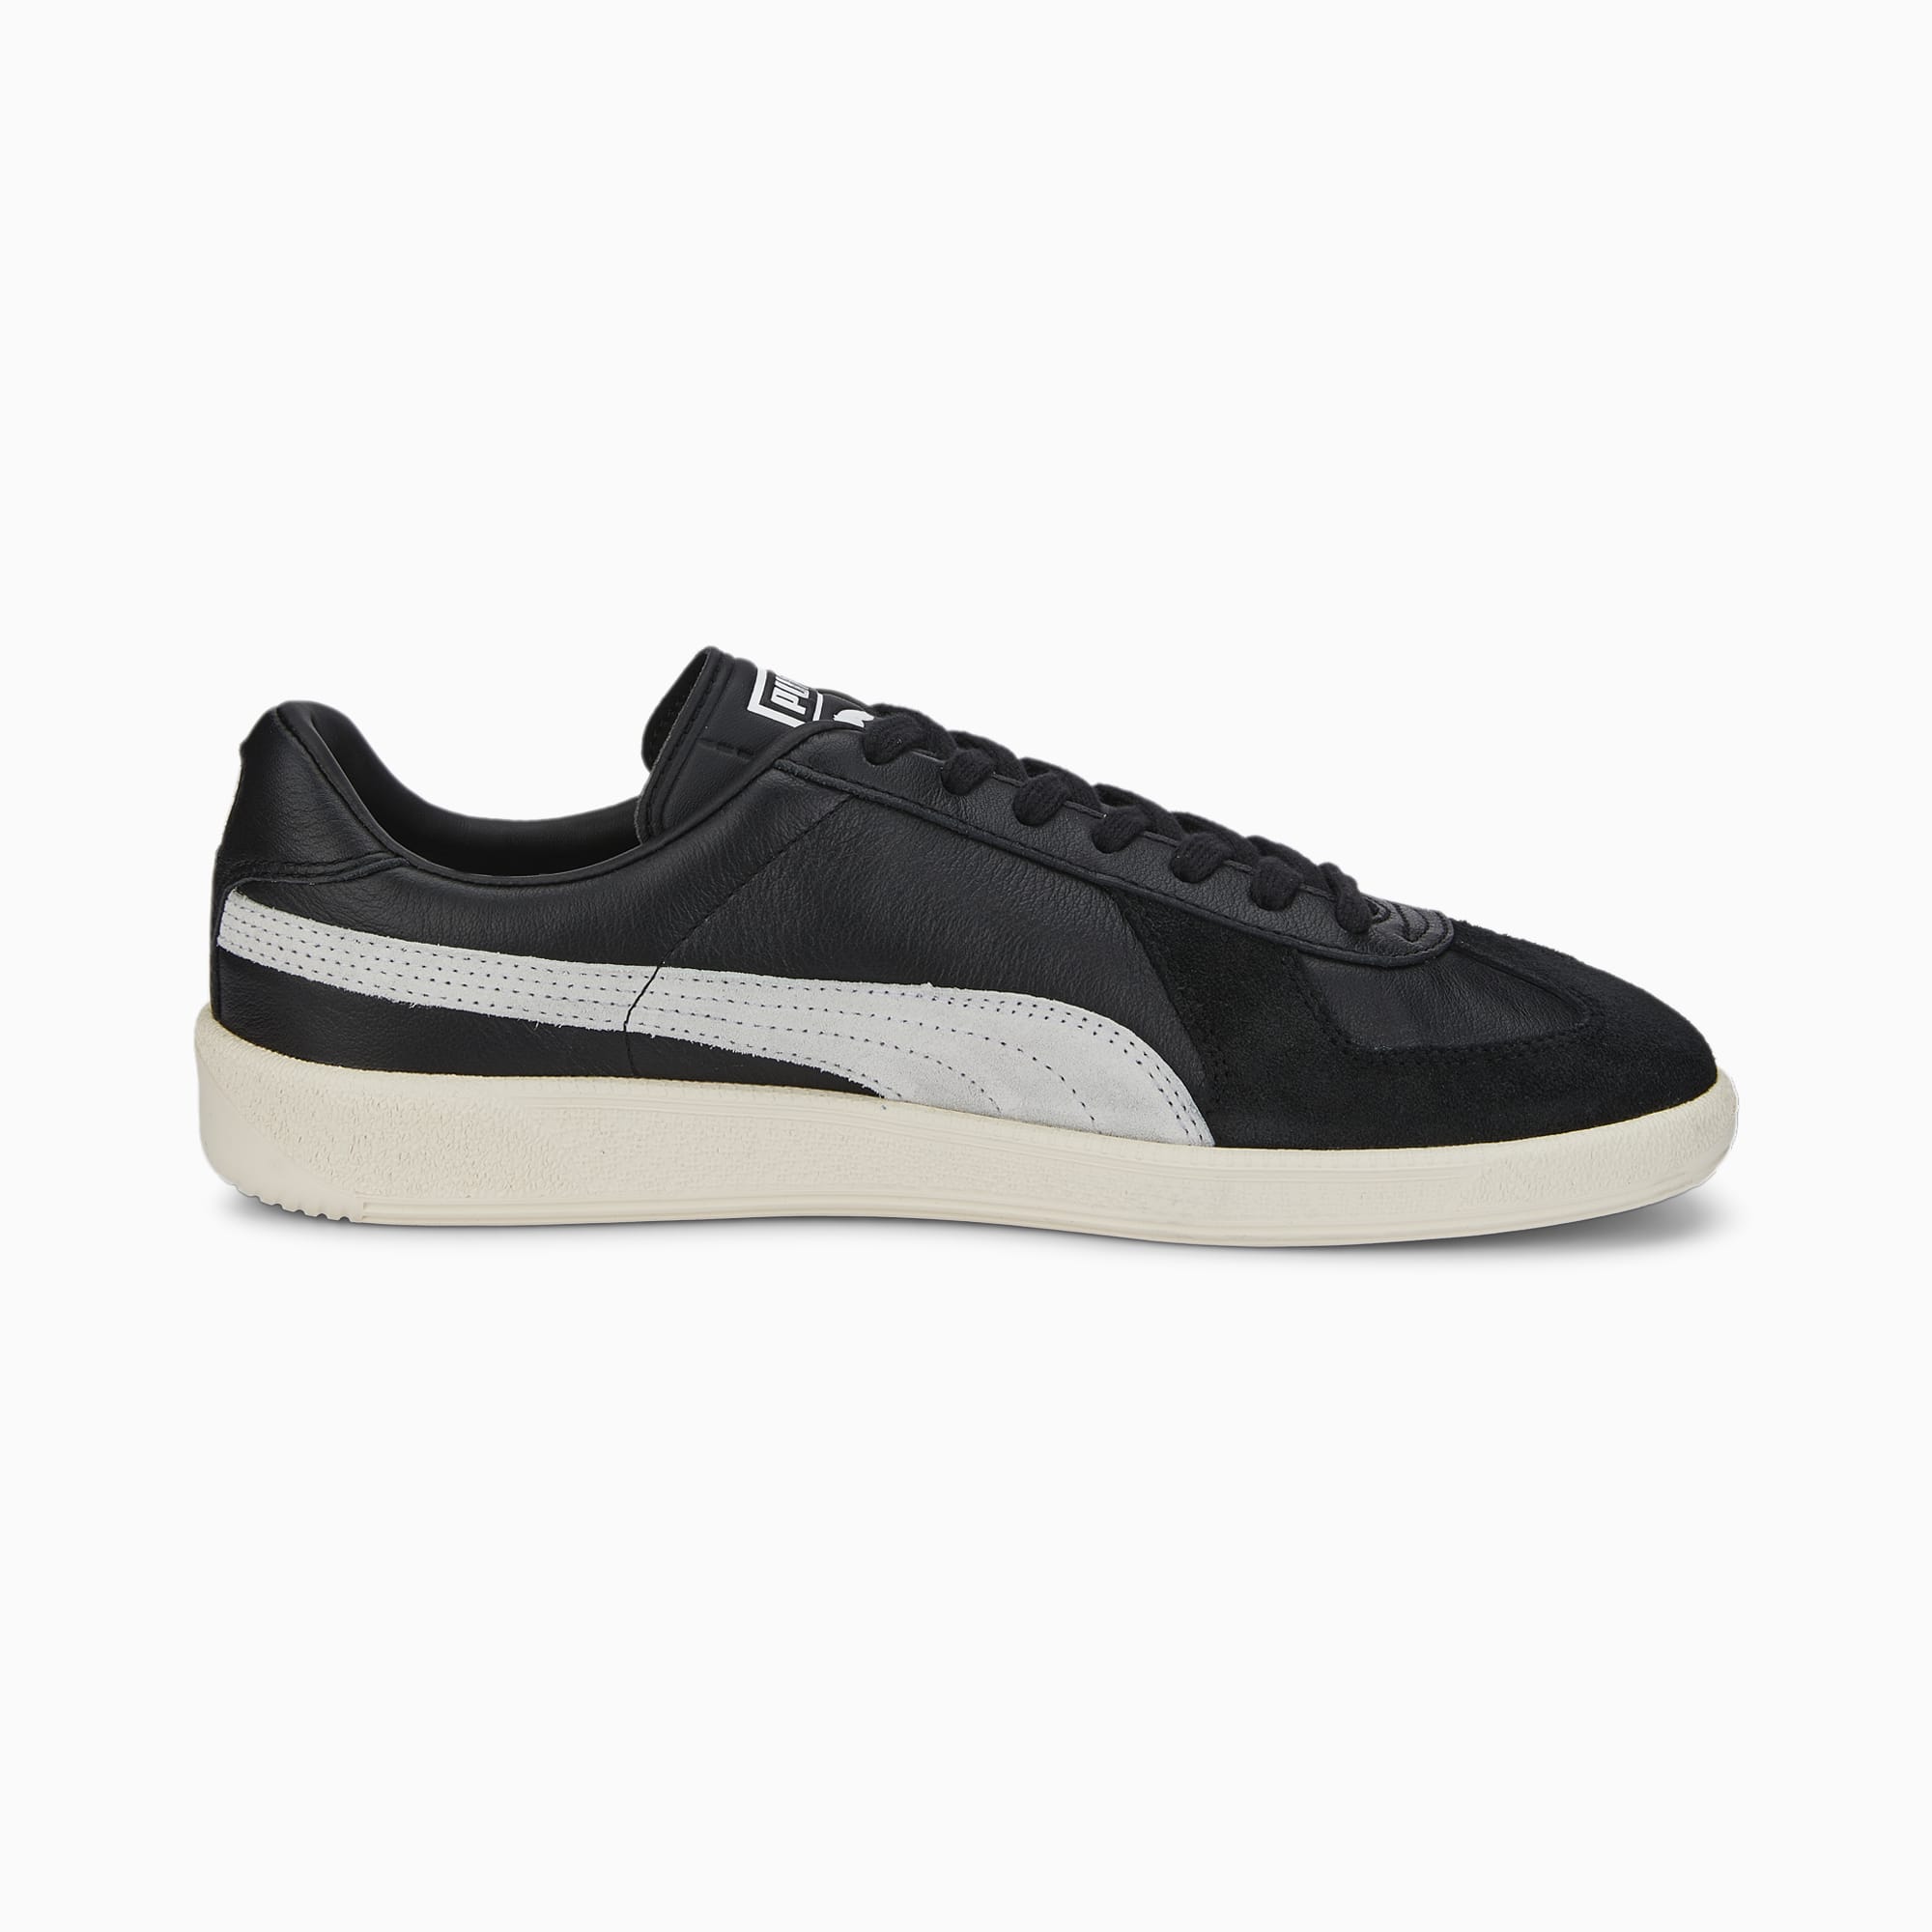 Women's PUMA Army Trainer Sneakers, Black/Pristine, Size 35,5, Shoes